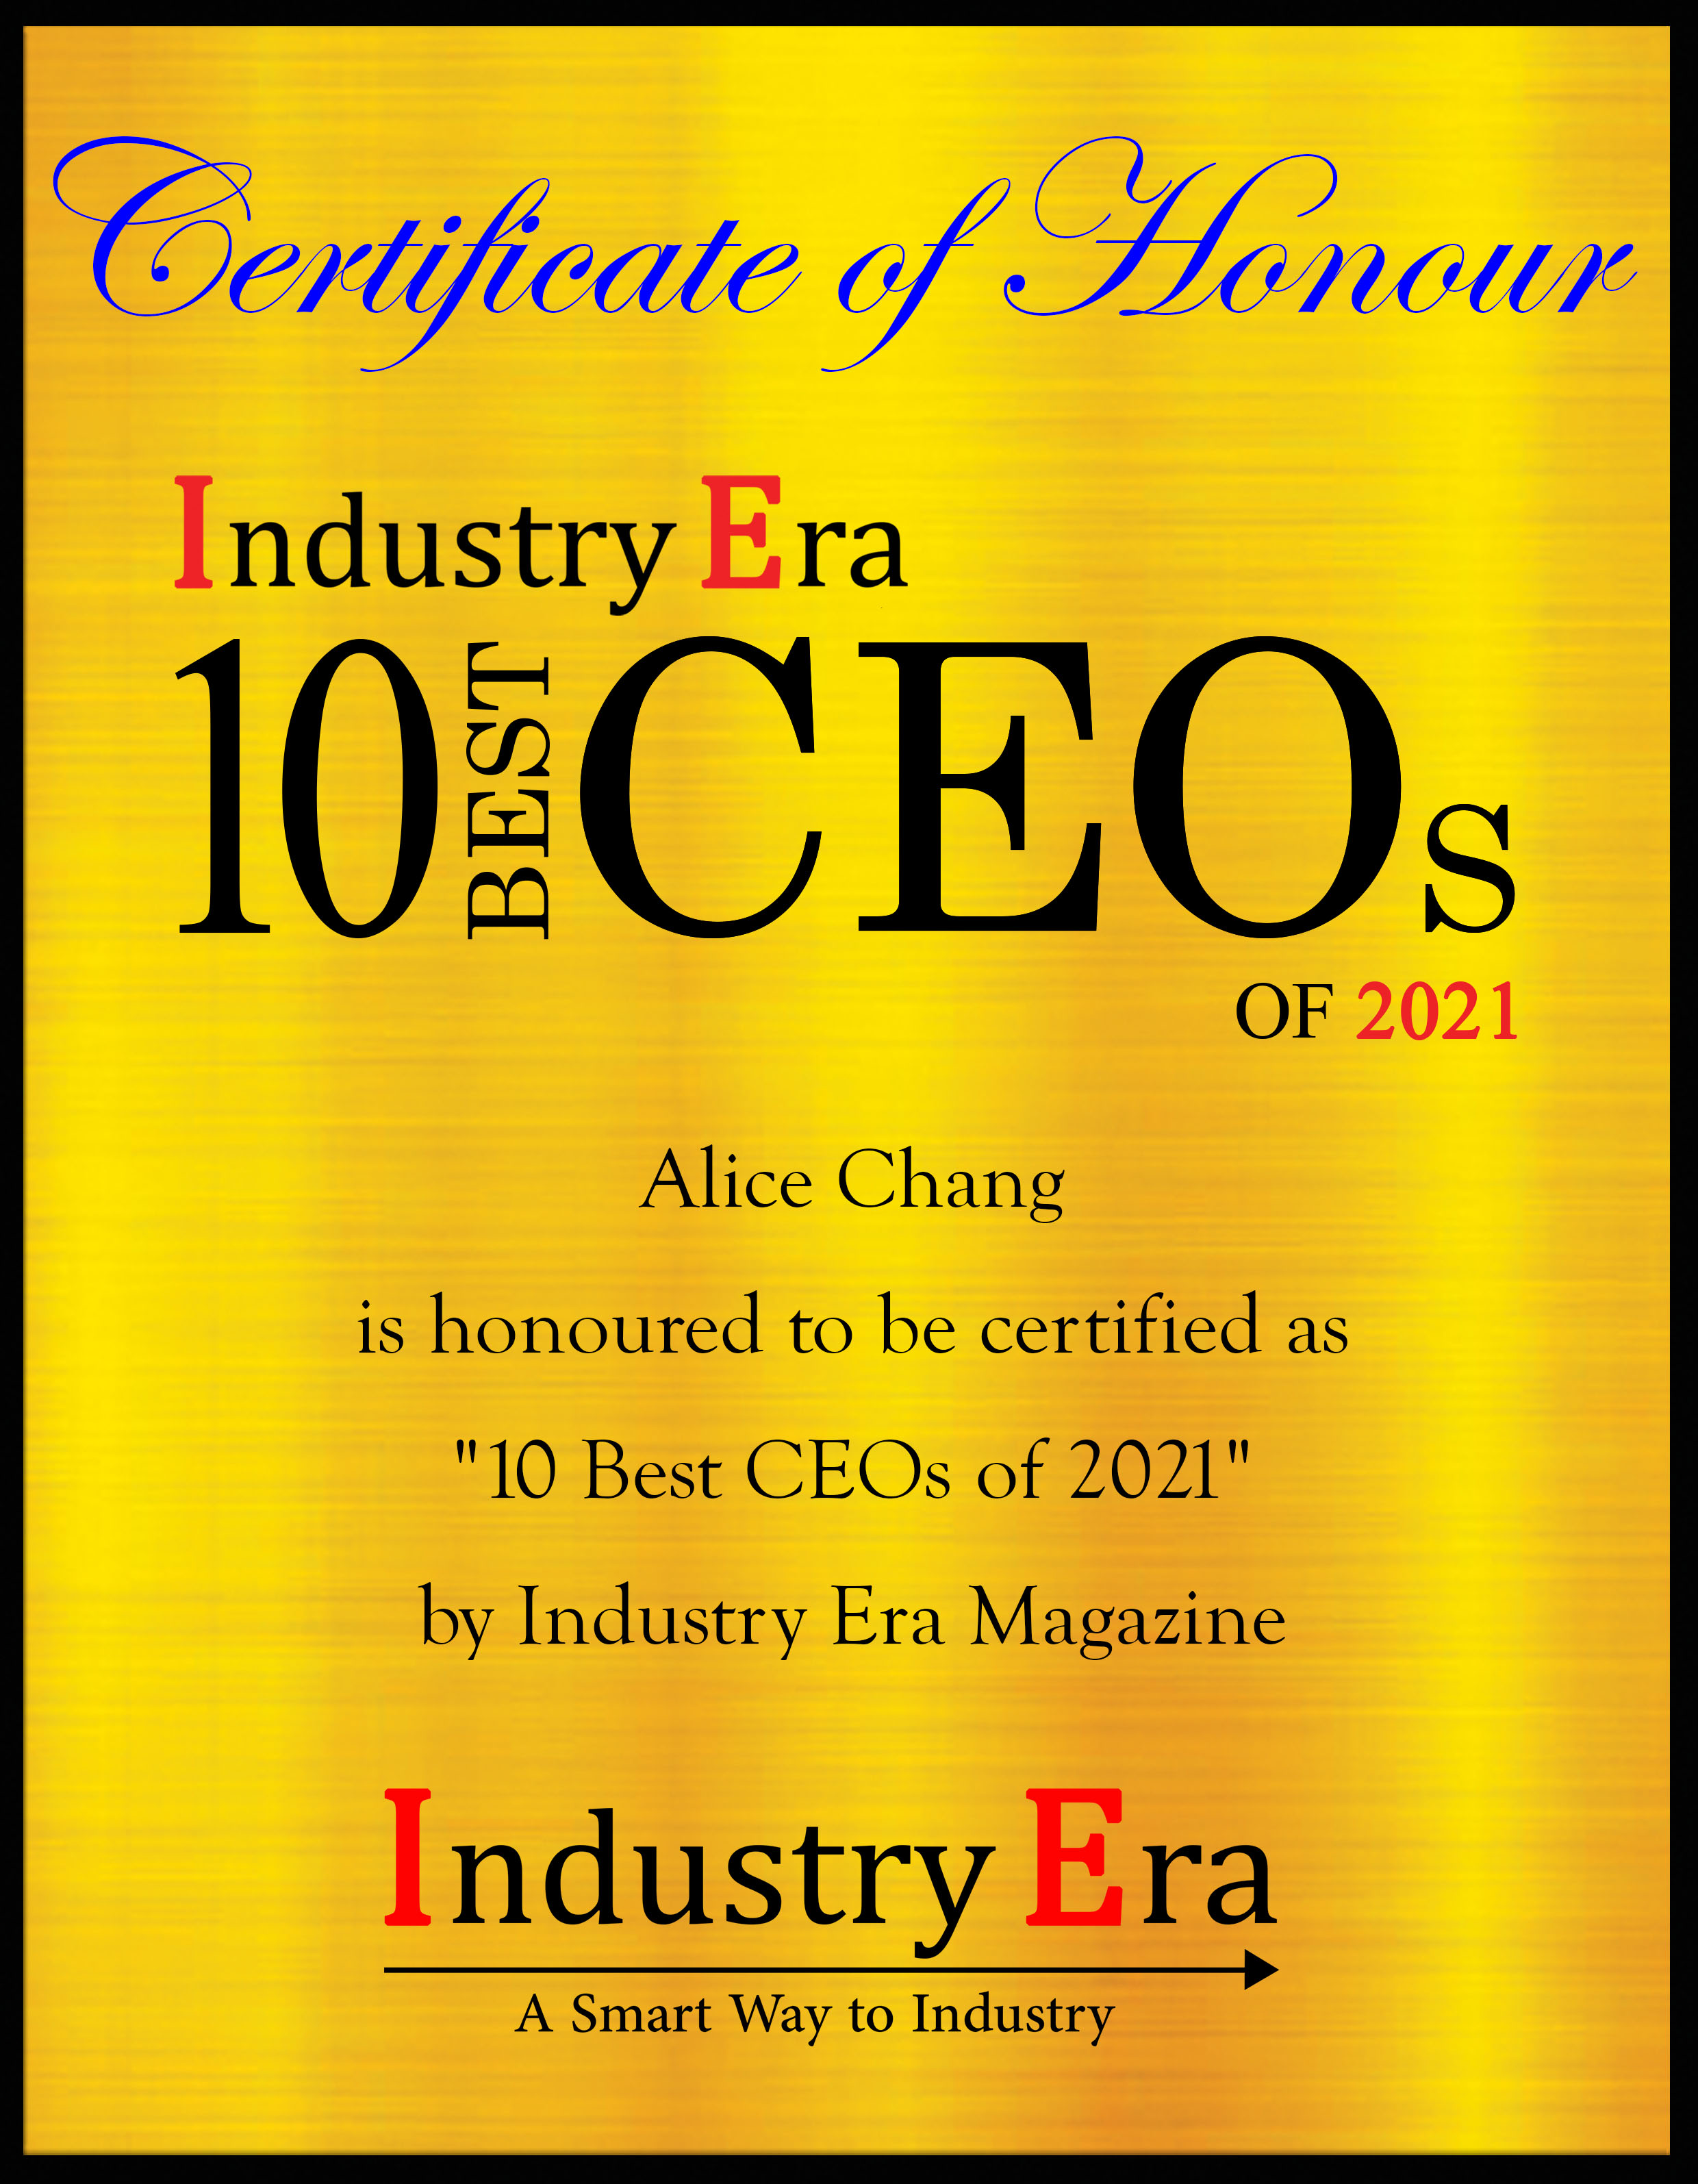 Alice Chang CEO and founder of Perfect Corp, Best CEOs of 2021